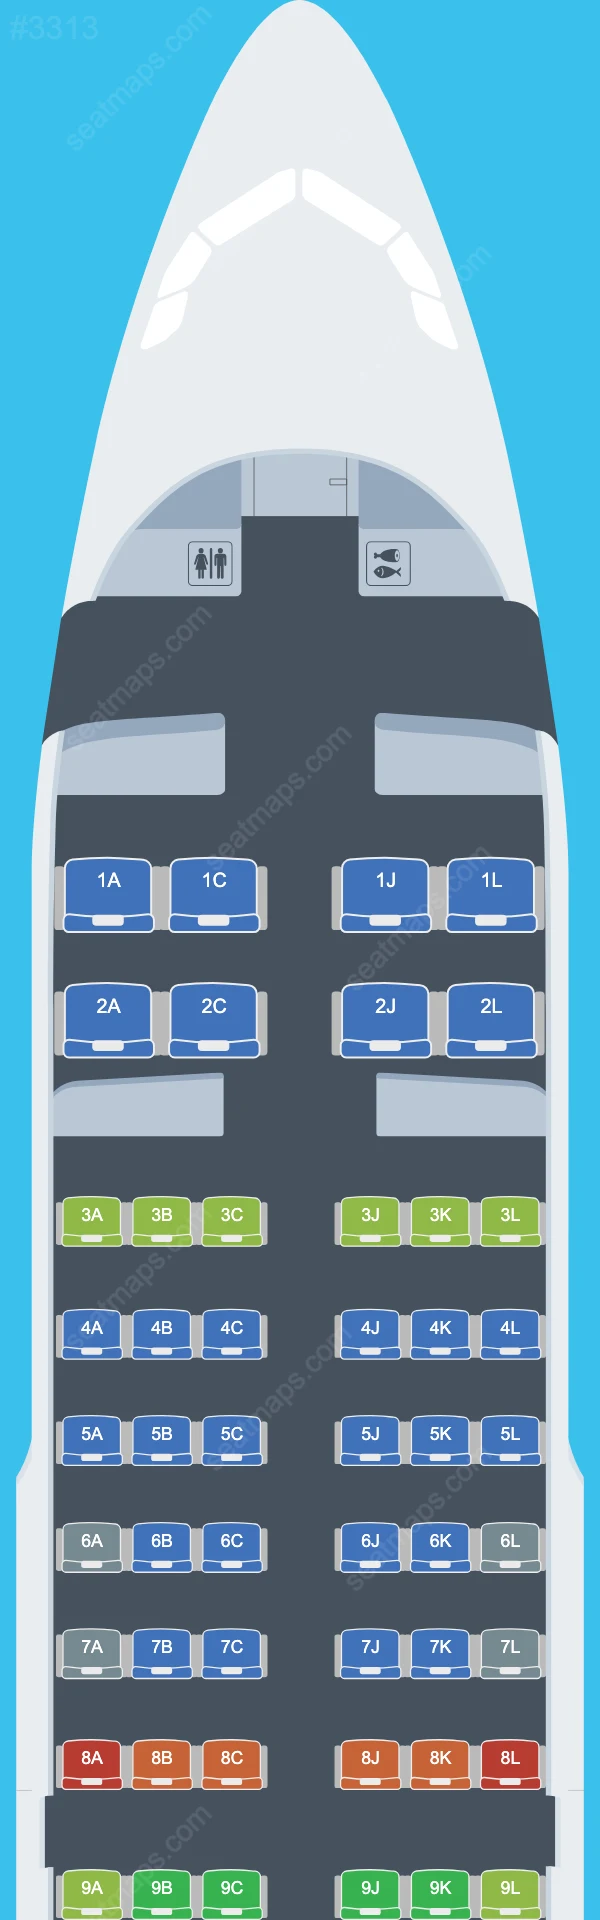 Shenzhen Airlines Airbus A319 Seat Maps A319-100